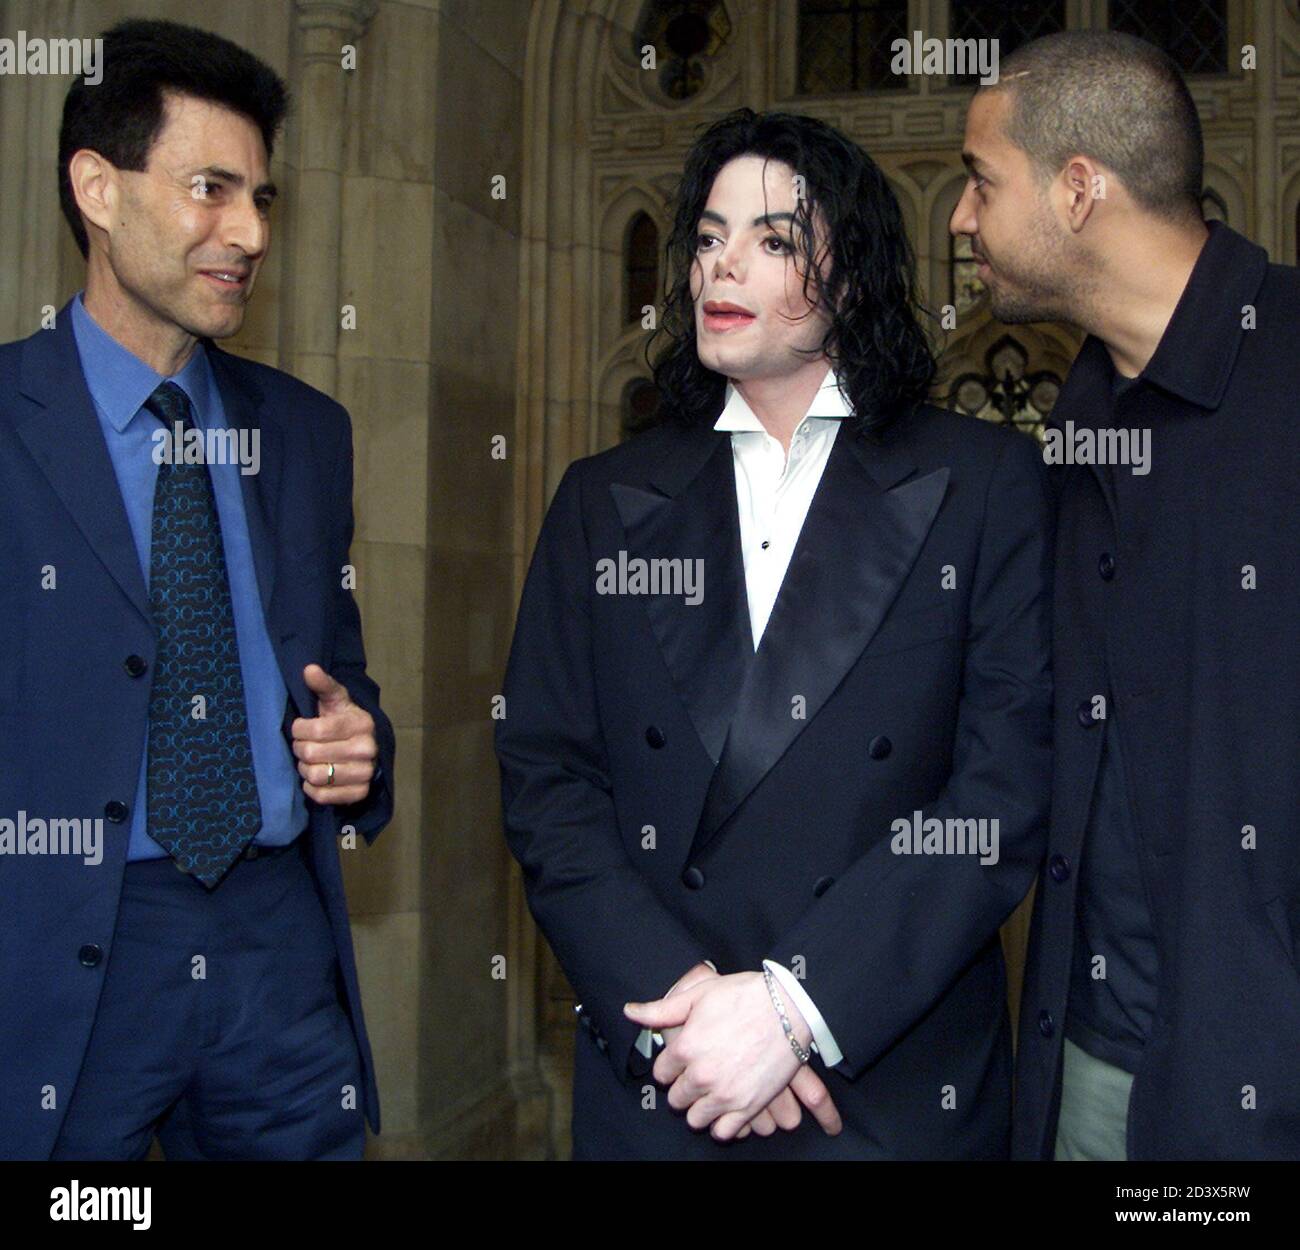 us-pop-singer-michael-jackson-c-talks-with-psychic-uri-geller-l-and-magician-david-blaine-r-on-arrival-at-the-house-of-lords-at-the-palace-of-westminster-in-central-london-june-14-2002-jackson-is-on-a-brief-visit-to-the-uk-during-which-he-is-also-due-to-take-part-in-a-charity-fundraising-event-in-exeter-with-both-geller-and-blaine-later-on-friday-reutersmichael-crabtree-mcasa-2D3X5RW.jpg